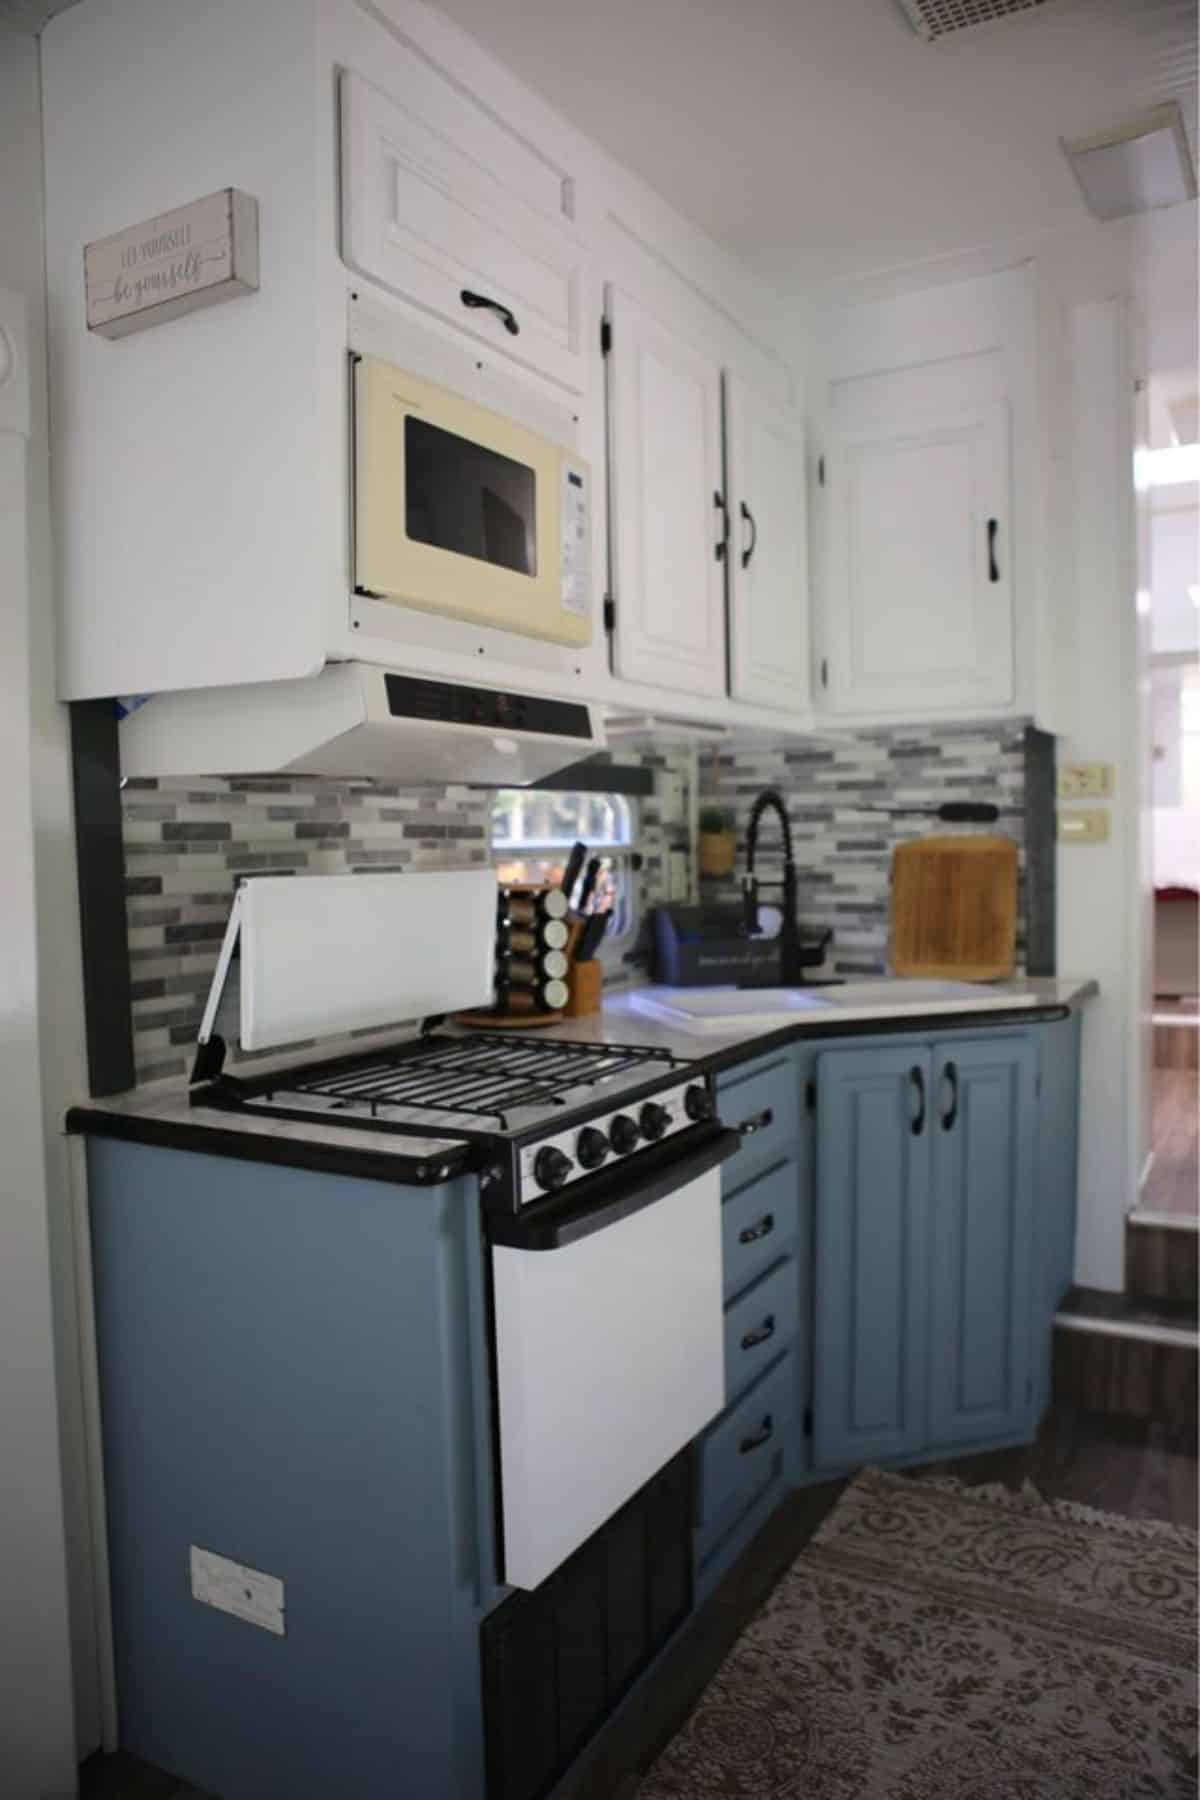 Kitchen is compact but stylish